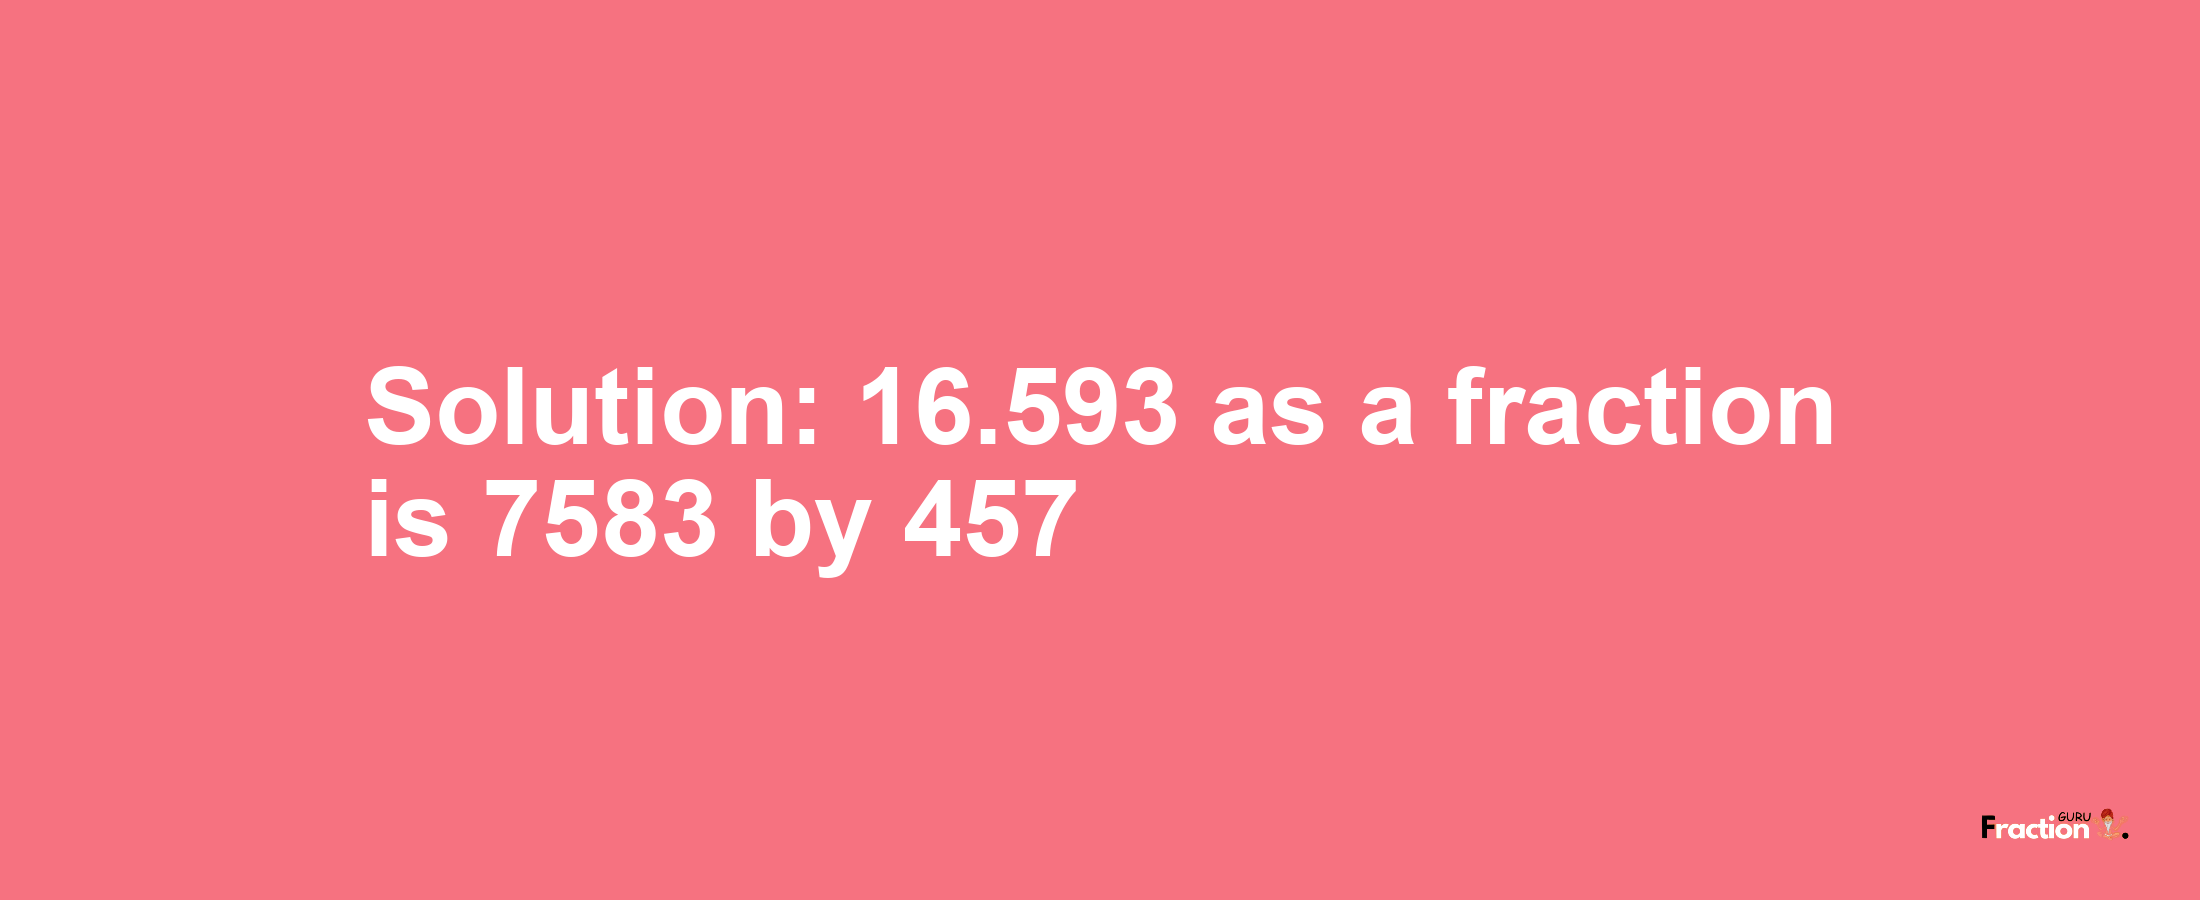 Solution:16.593 as a fraction is 7583/457